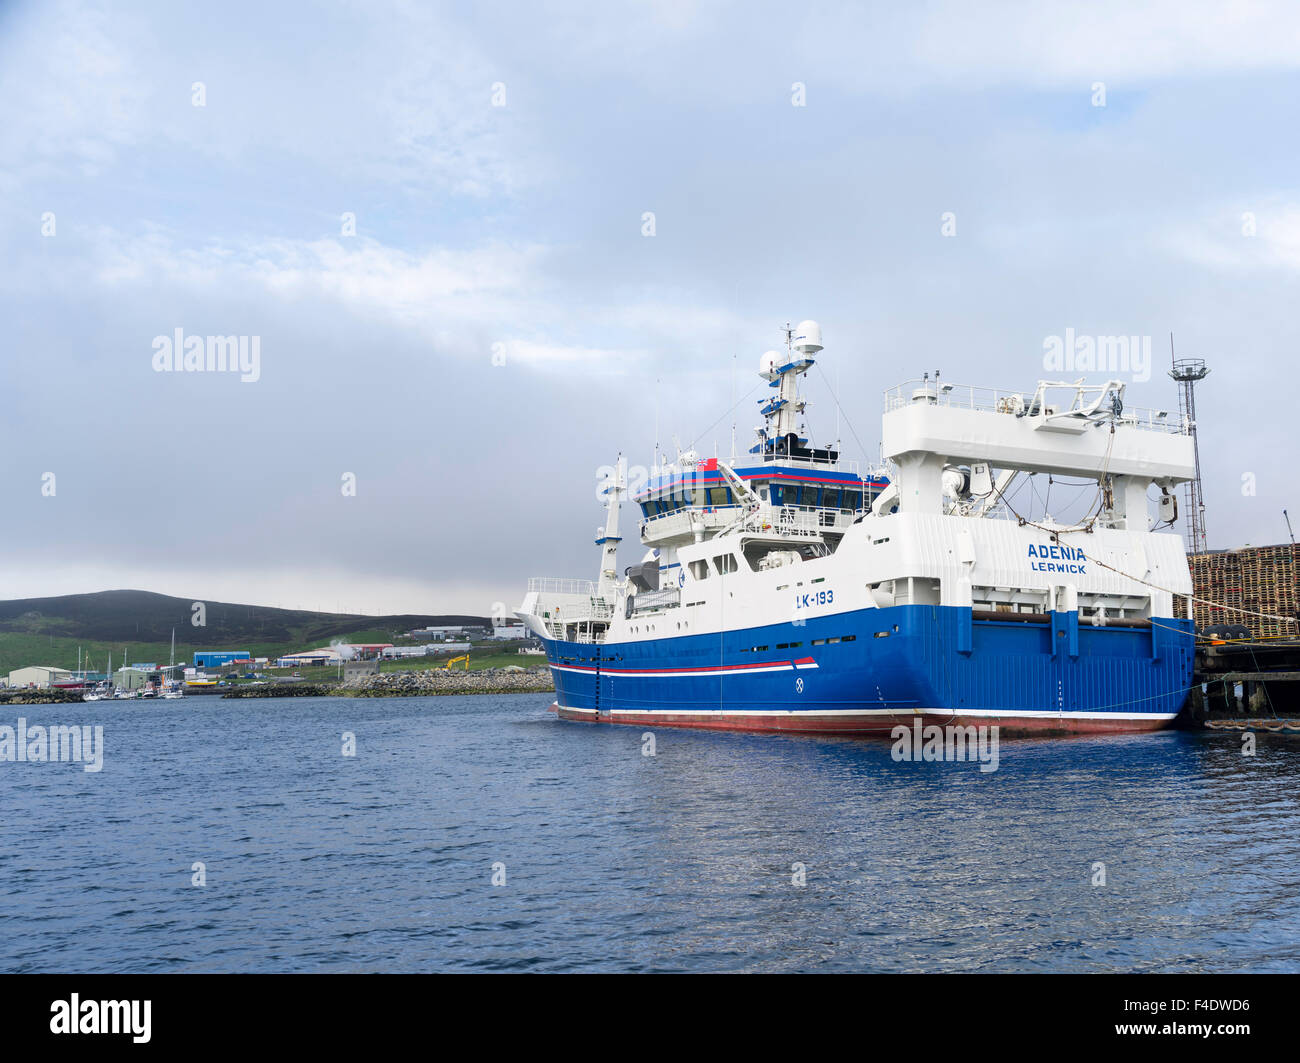 Lerwick, capital of the Shetland Islands in Scotland. Trawler in fishing port. Shetland, Northern Isles, Scotland. (Large format sizes available) Stock Photo